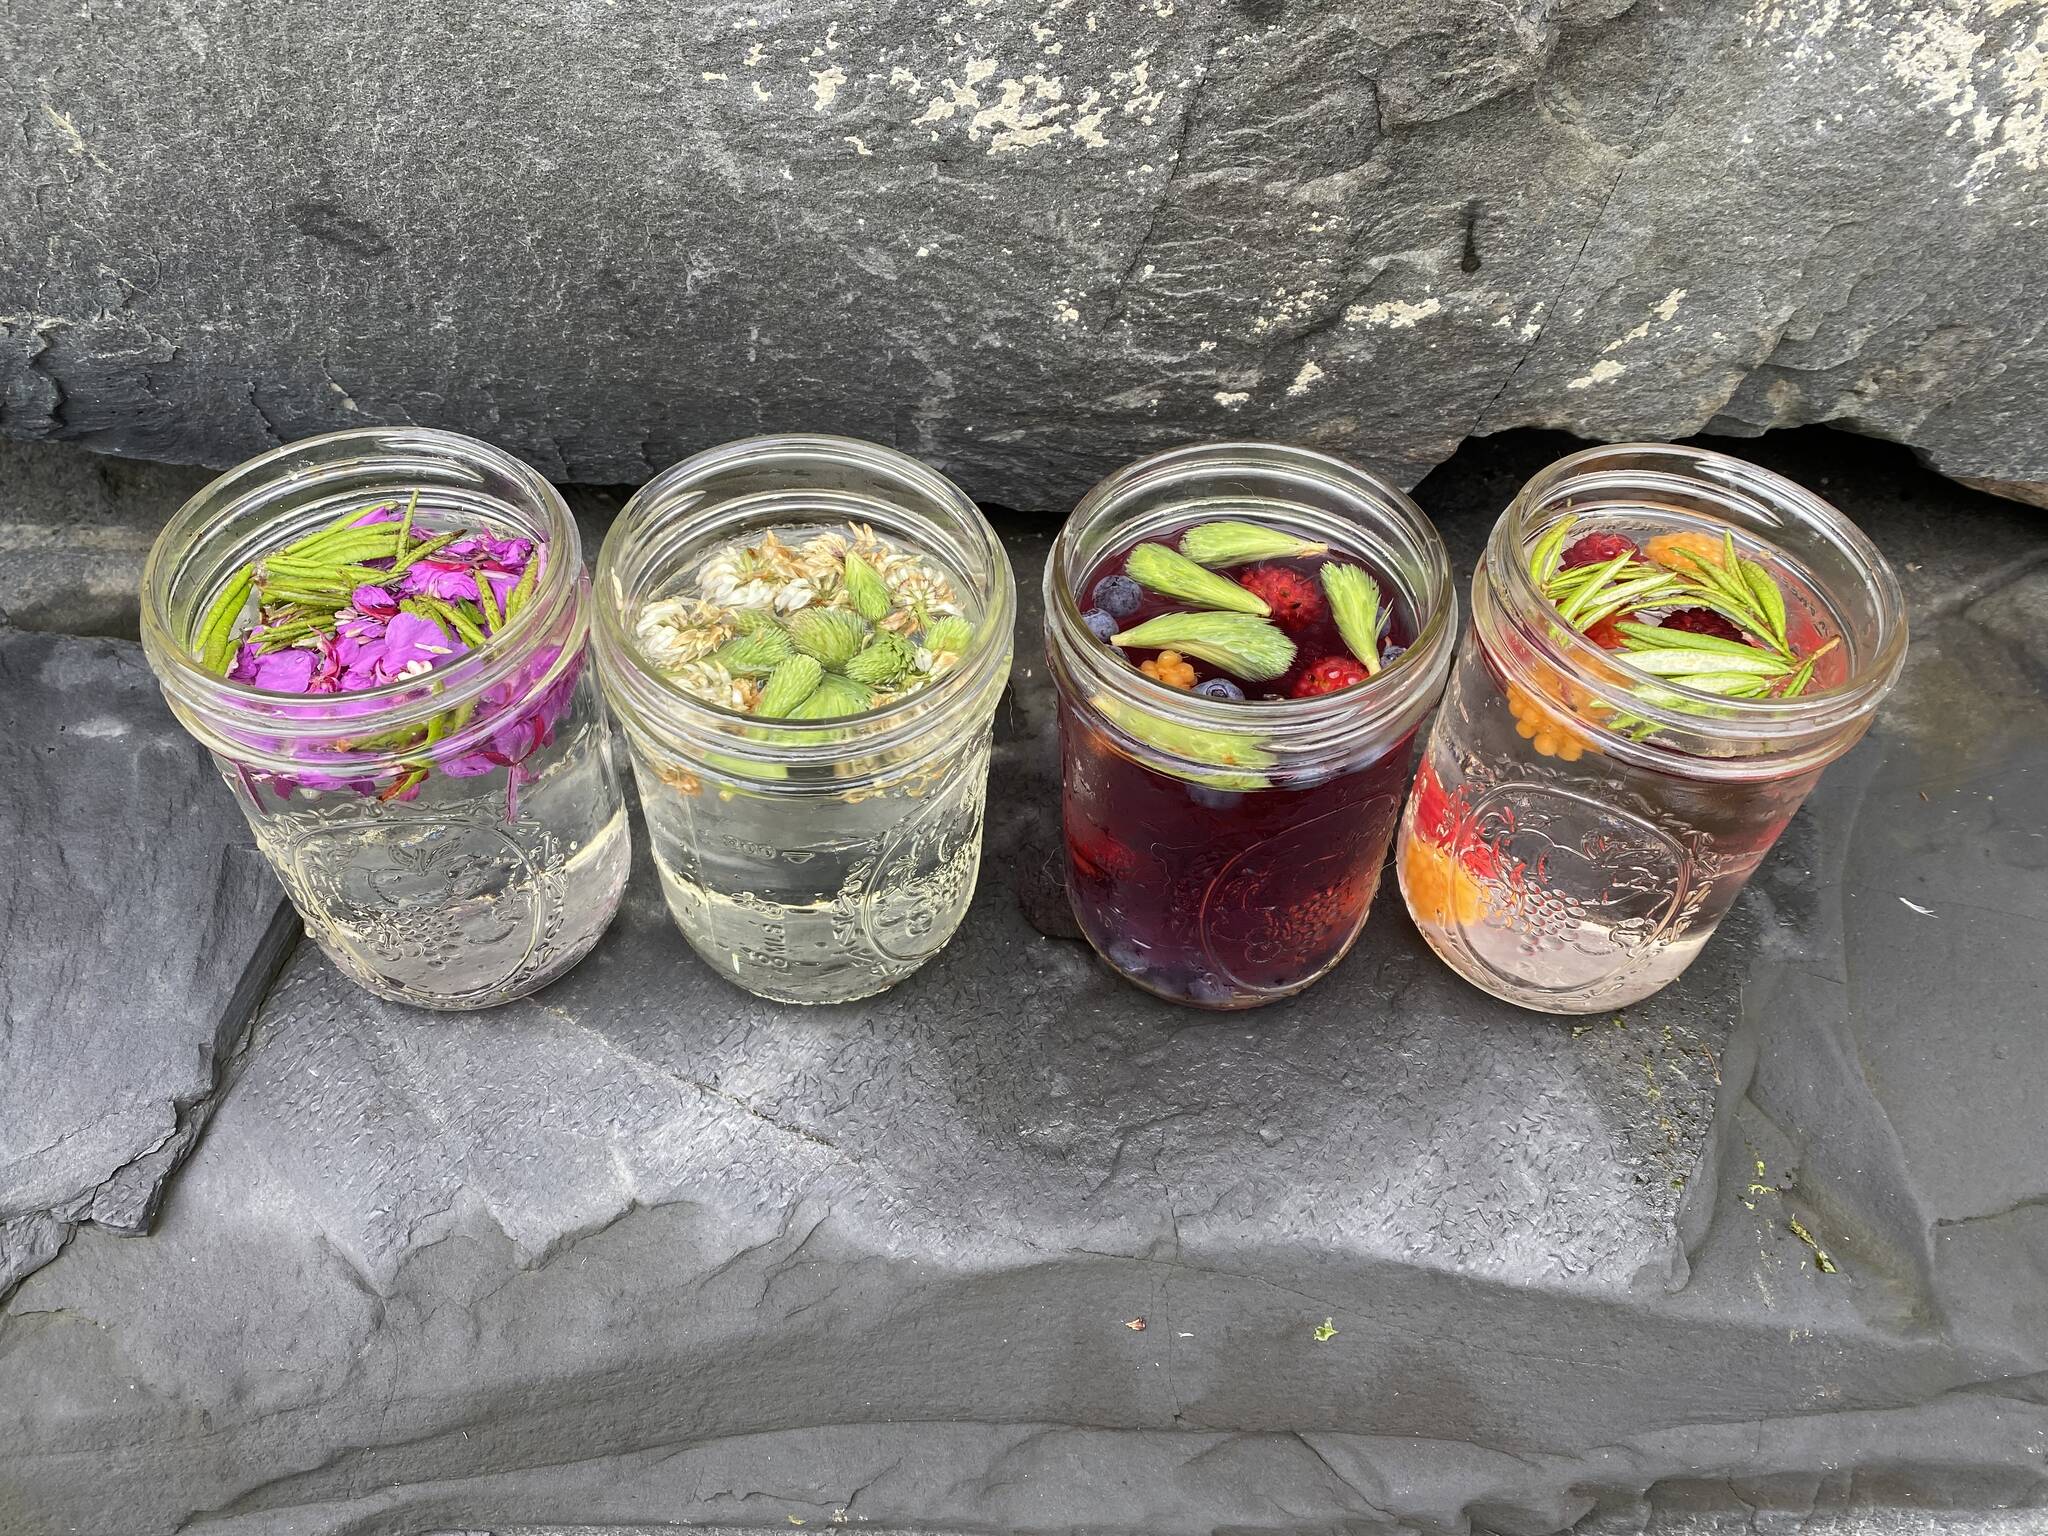 Flavored waters using local ingredients/plants and berries. (Vivian Faith Prescott / For the Capital City Weekly)